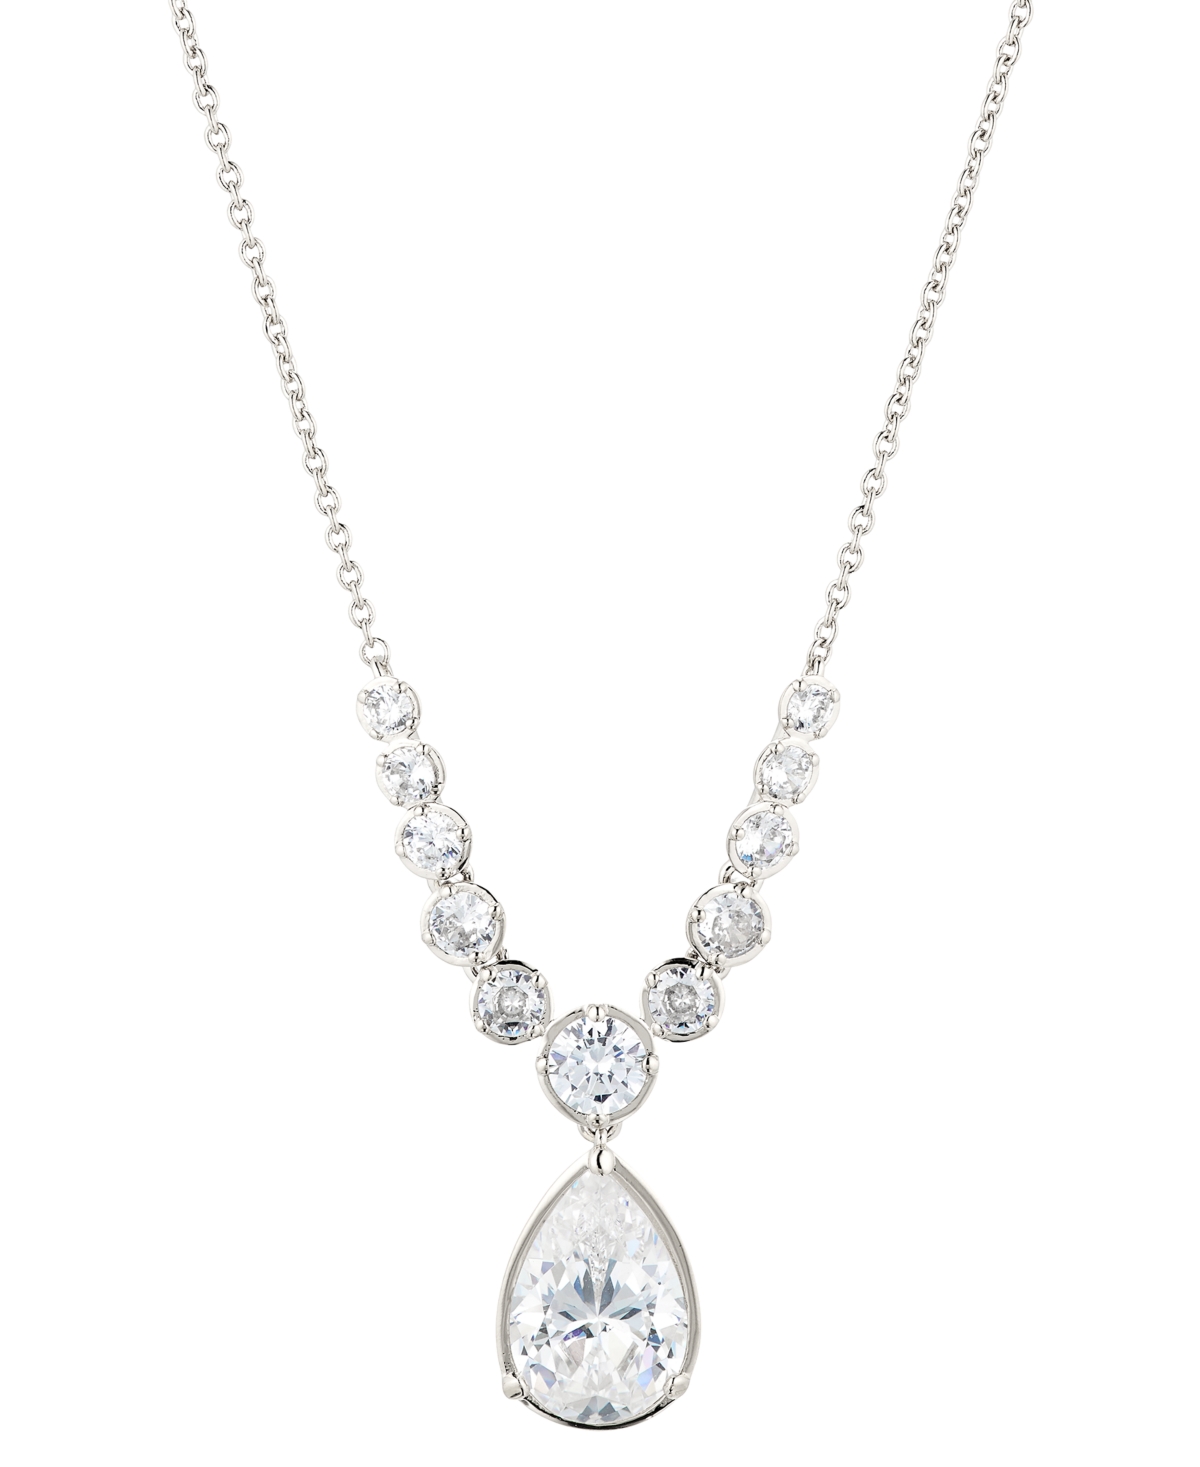 Eliot Danori Pear-shape Cubic Zirconia Pendant Necklace, 16" + 2" Extender, Created For Macy's In Silver